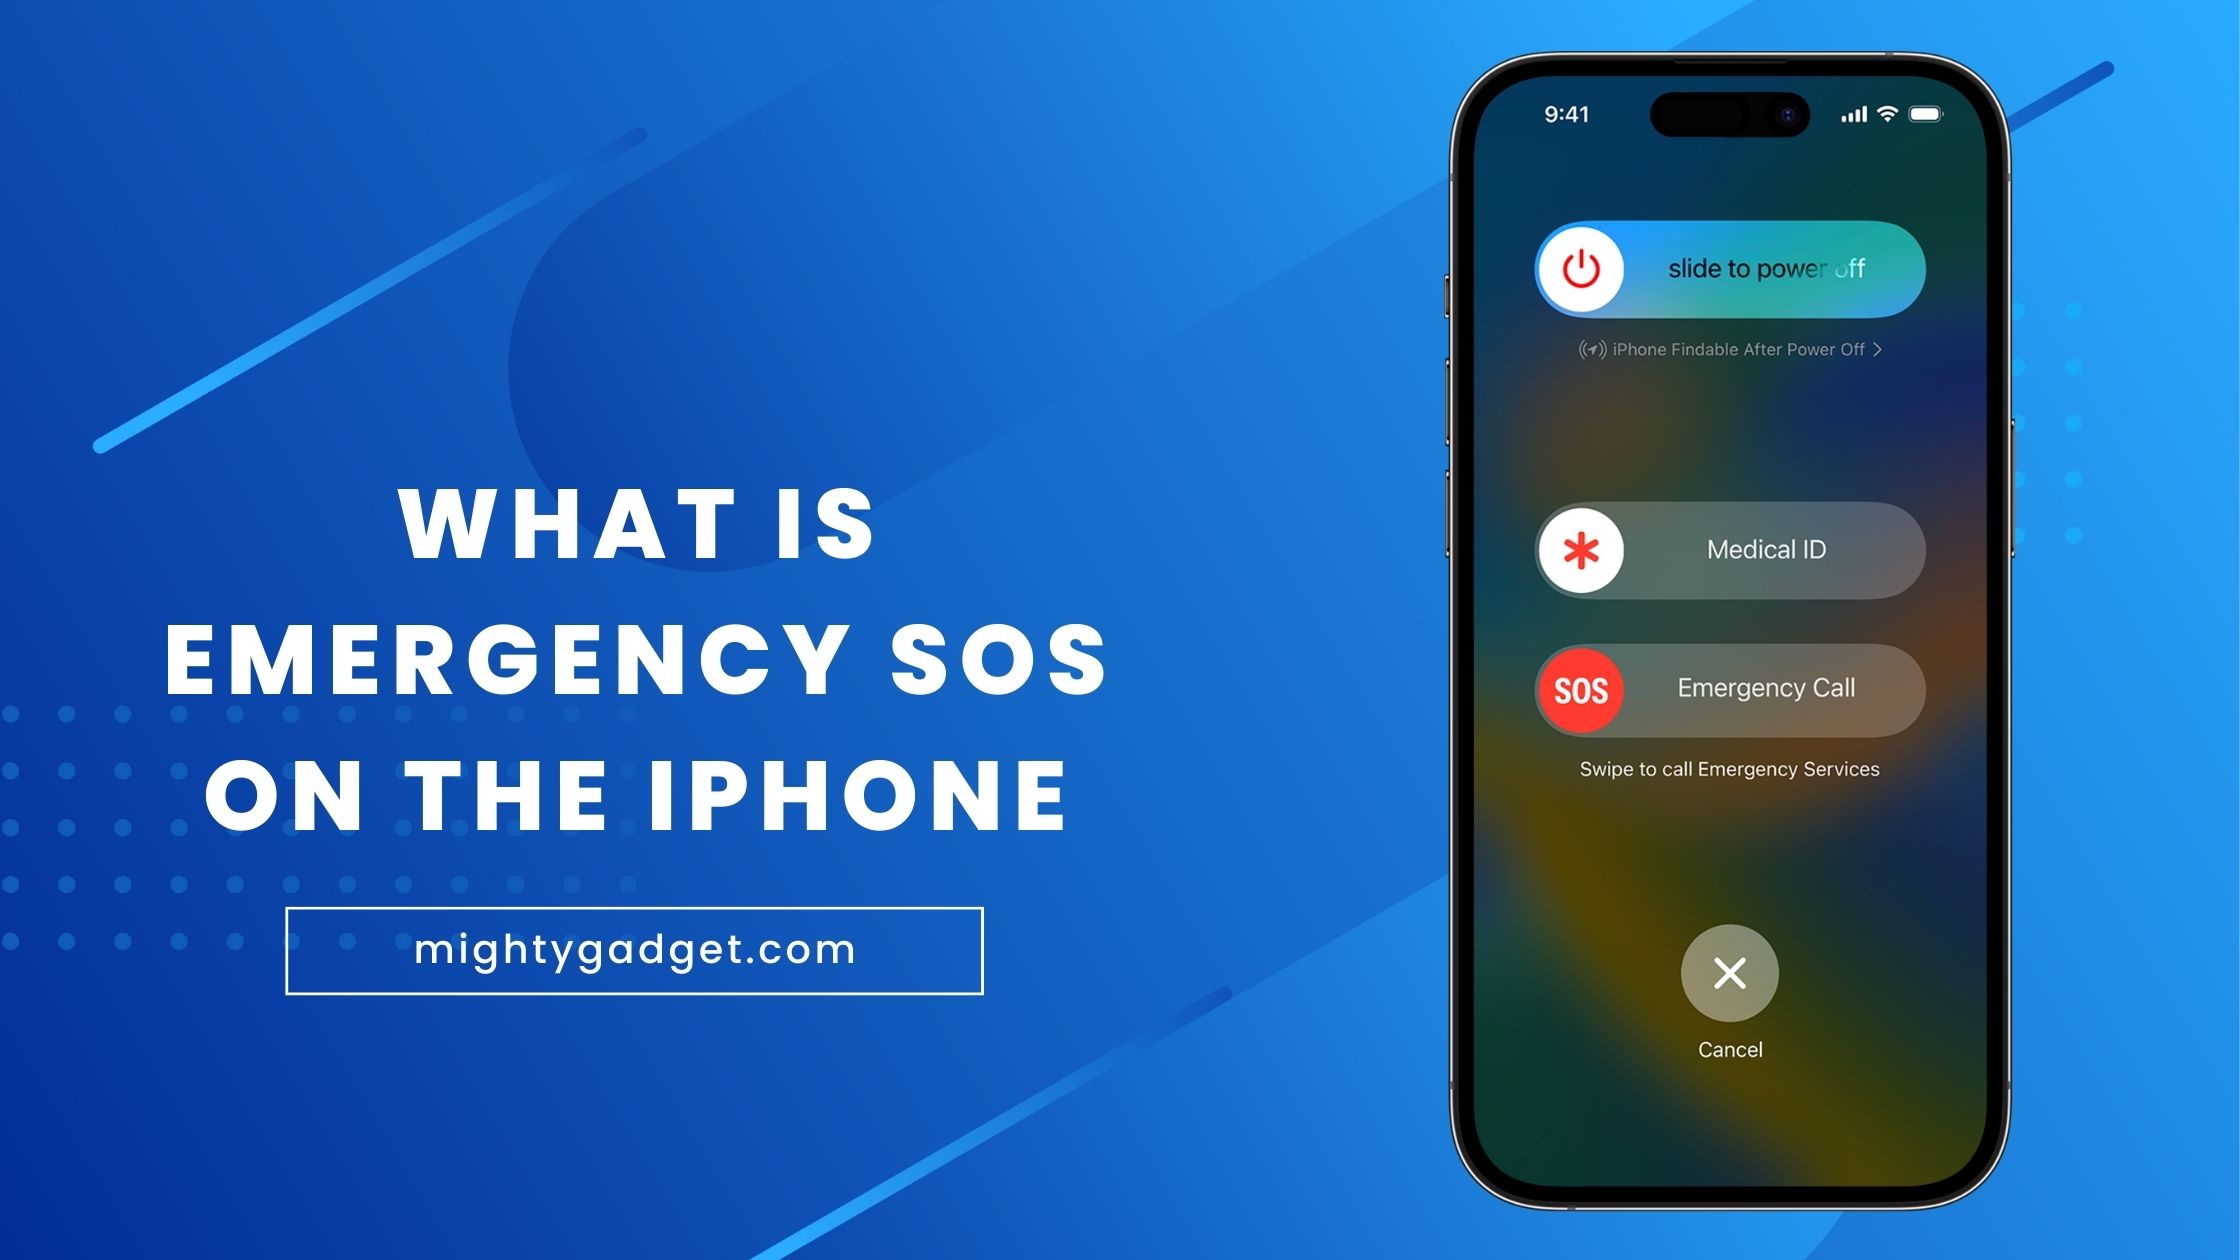 What is Emergency SOS & How to Turn Off Emergency SOS on Your iPhone / Apple Warch?